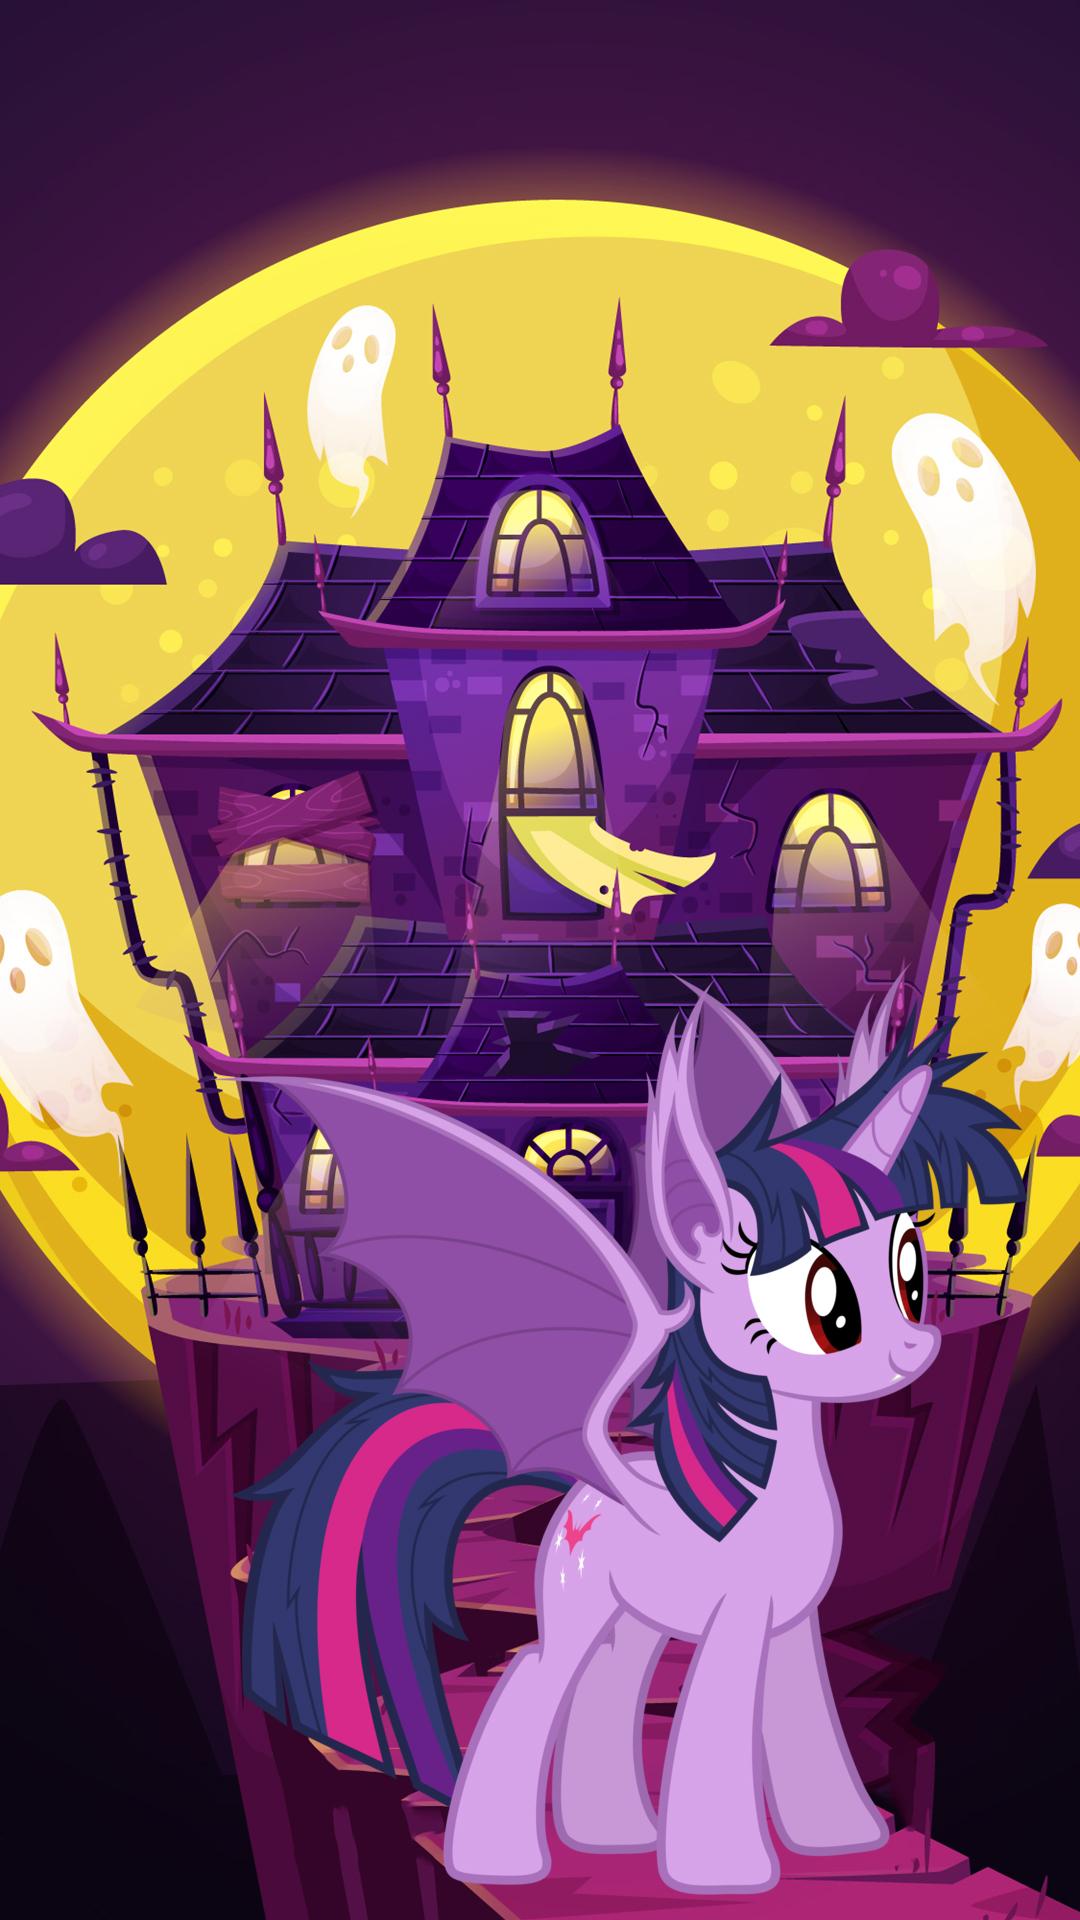 Cute Halloween Phone wallpaper with My Little Ponies as